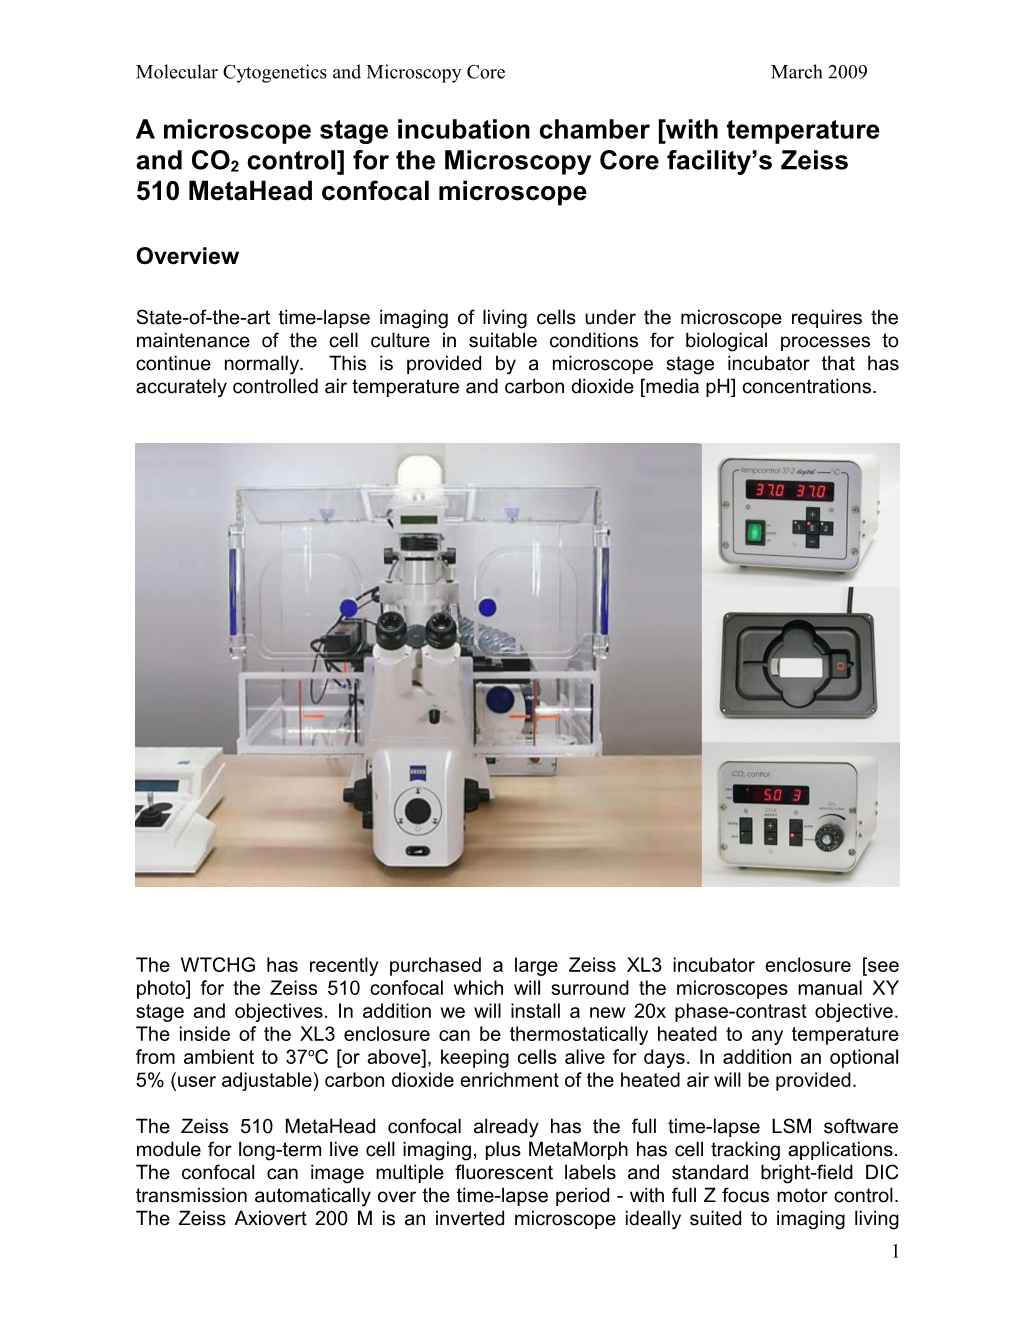 Case for Purchase of a Microscope Incubation Chamber